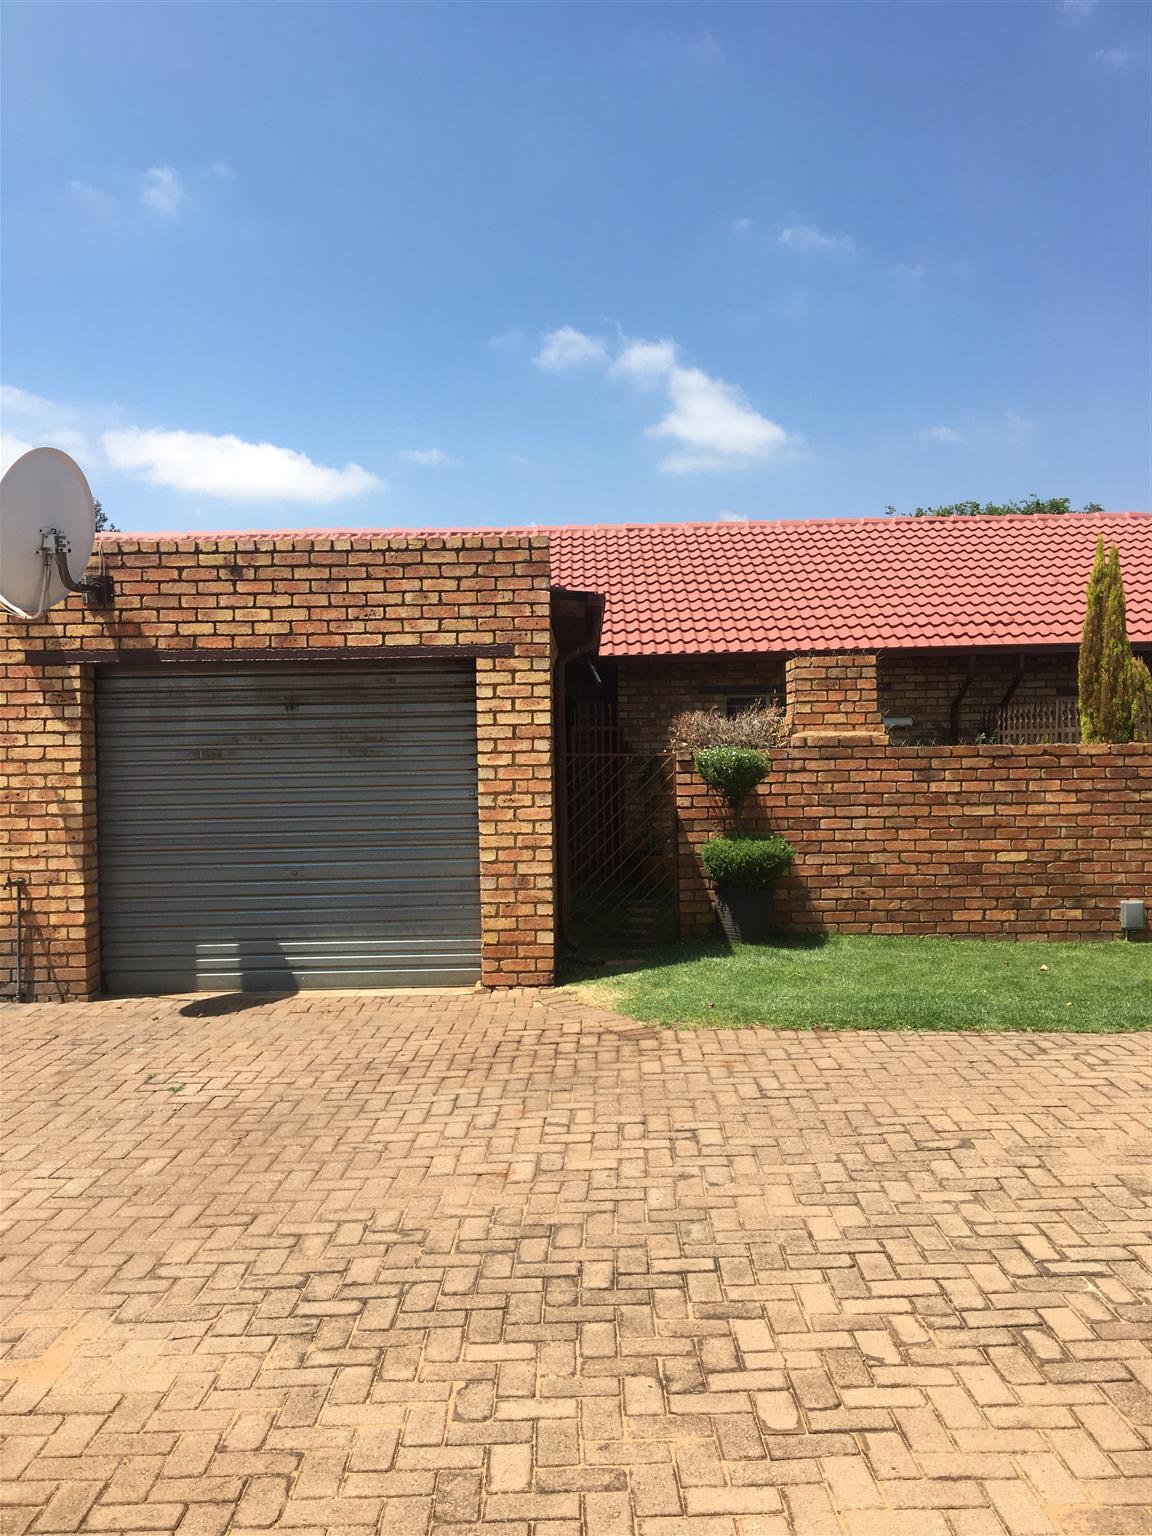 Townhouse in Birchleigh- 2 bedroom, garage, private garden and braai stand.